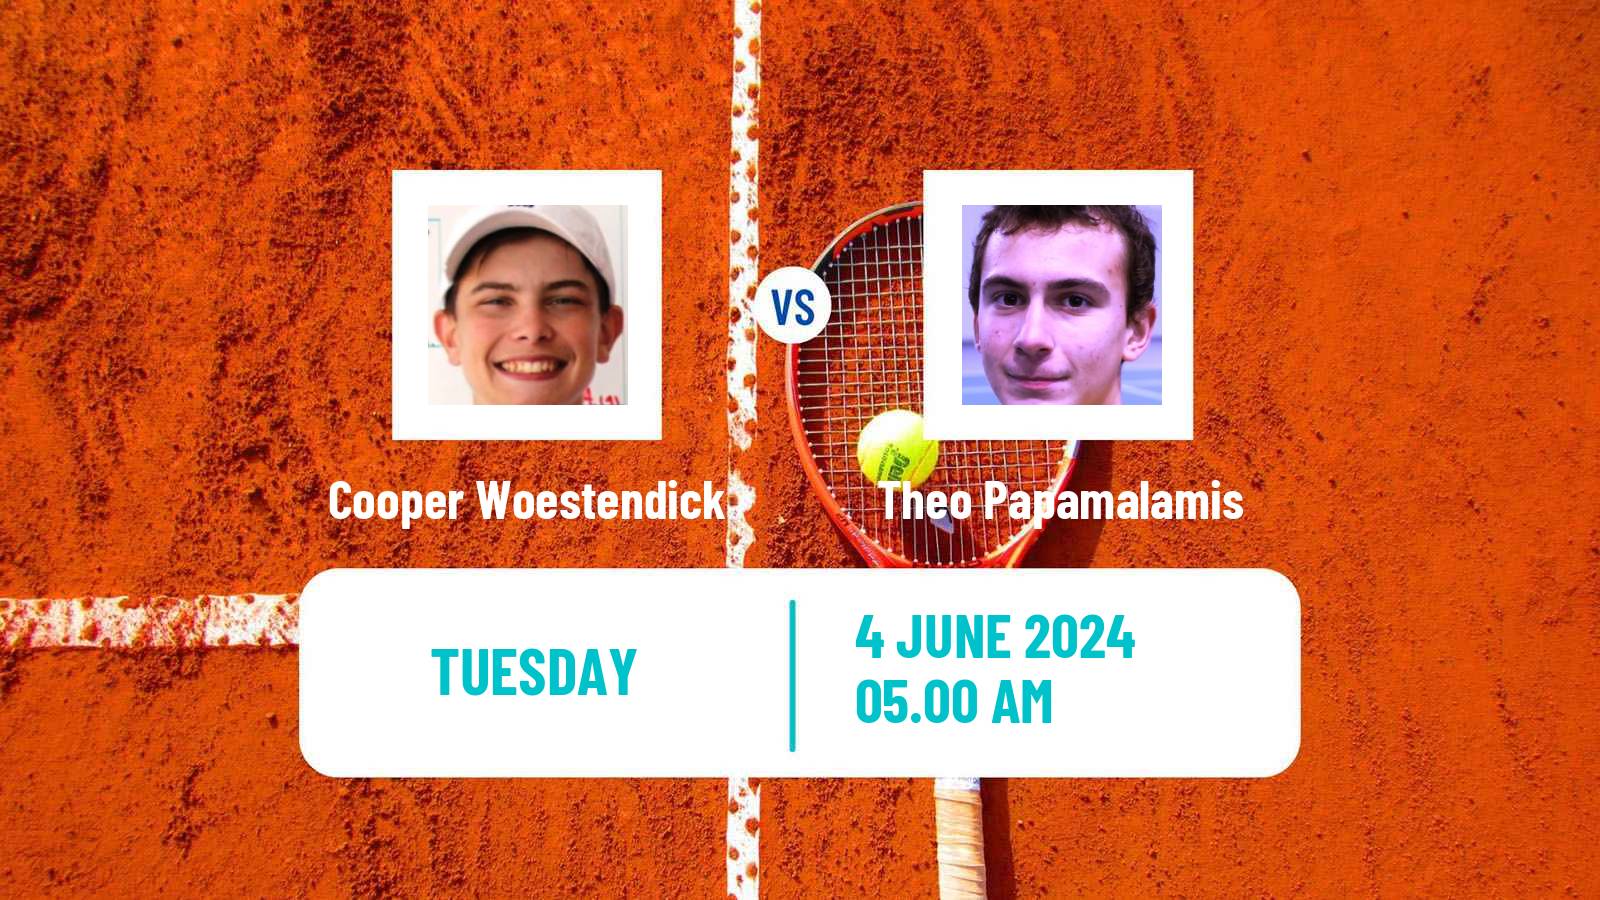 Tennis Boys Singles French Open Cooper Woestendick - Theo Papamalamis